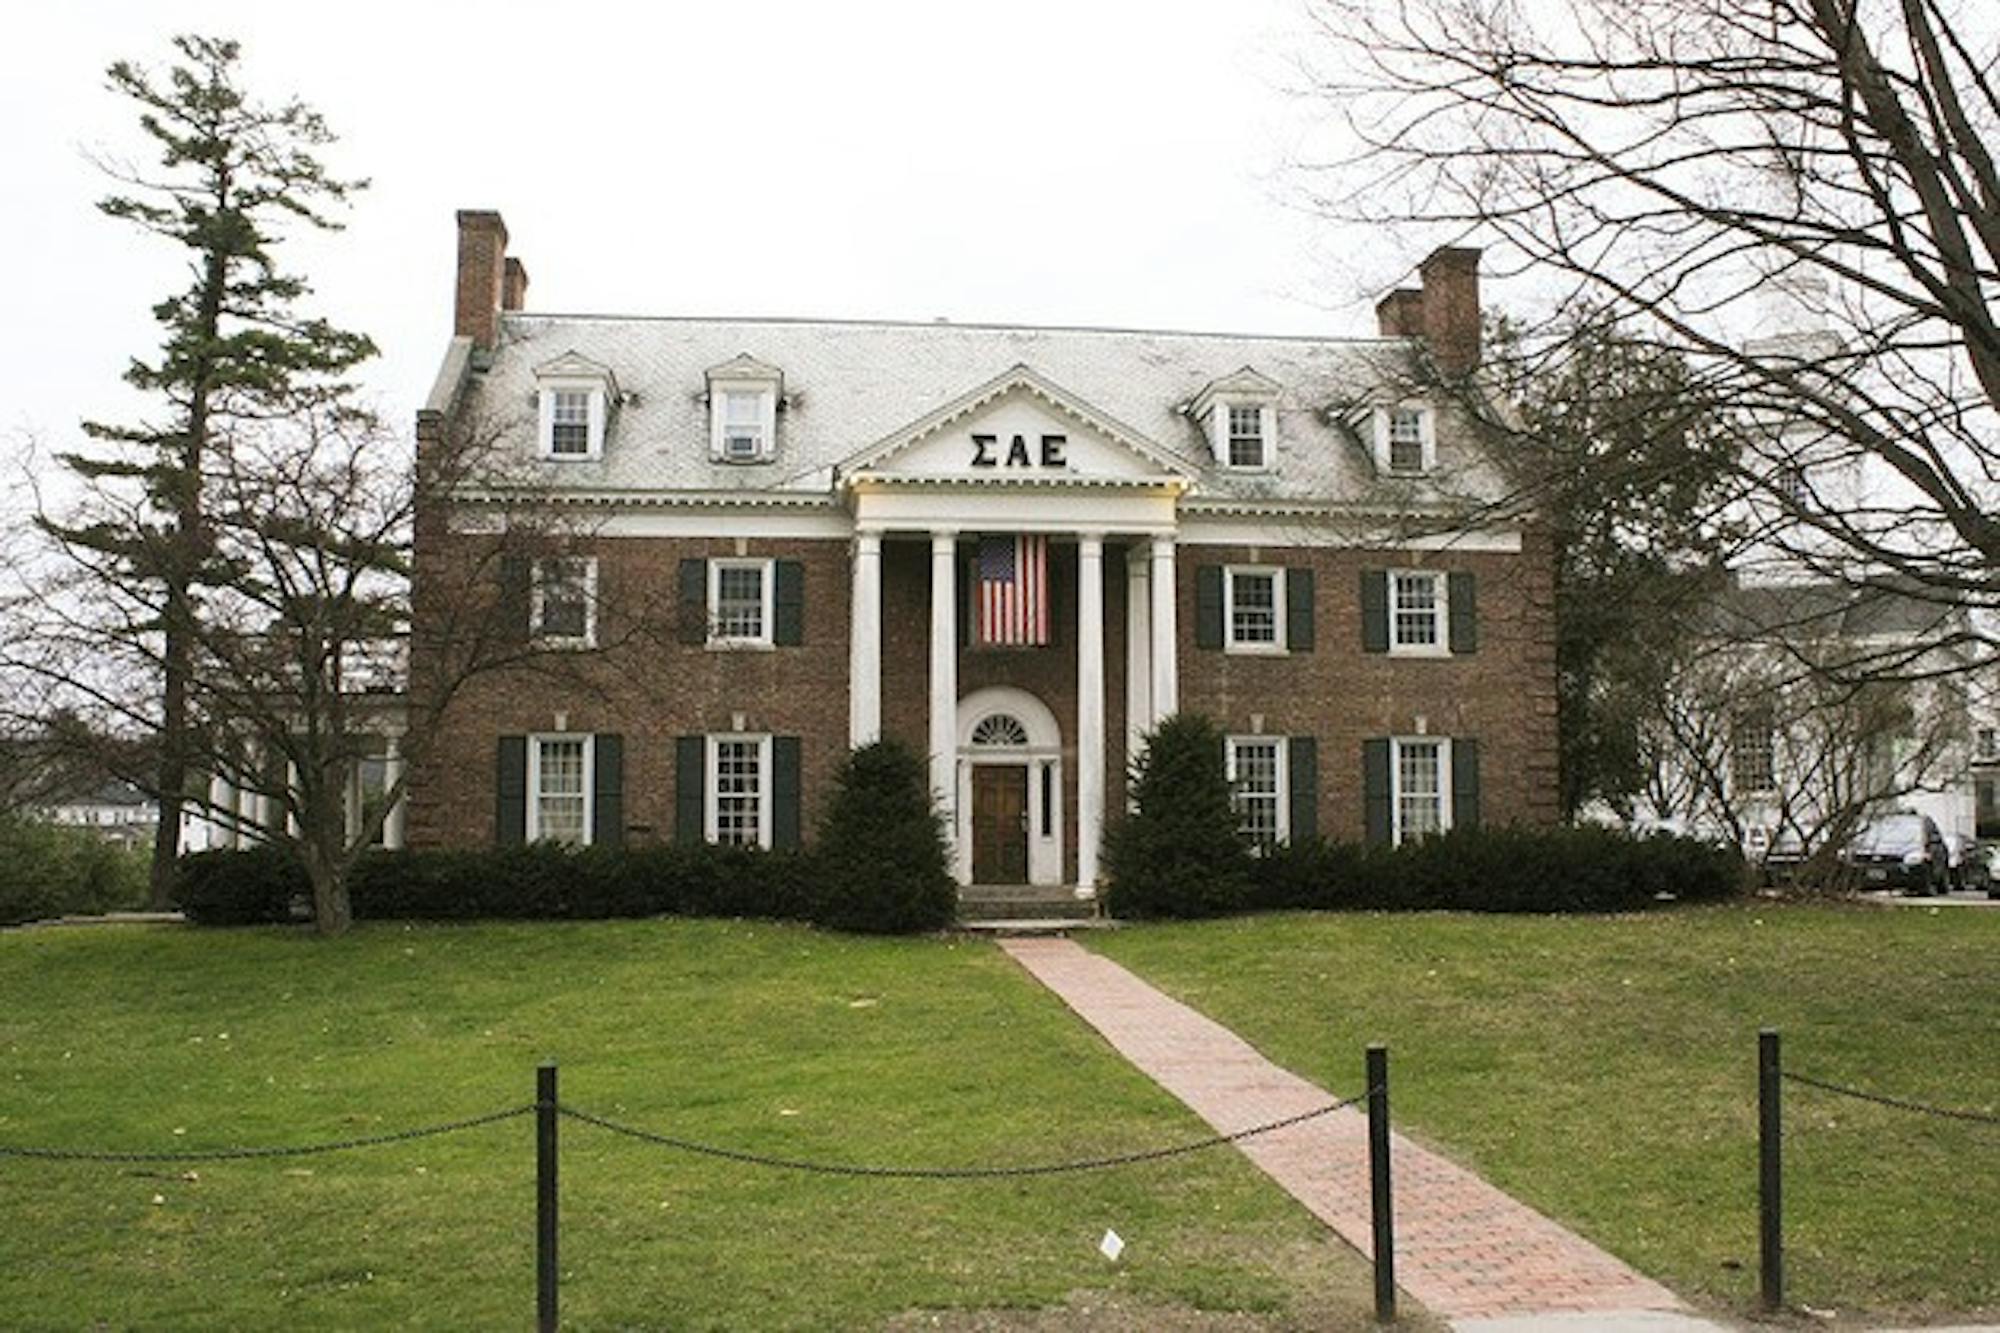 The College's Undergraduate Judicial Affairs Office dropped 24 of the 27 hazing charges against SAE members after obtaining new evidence.